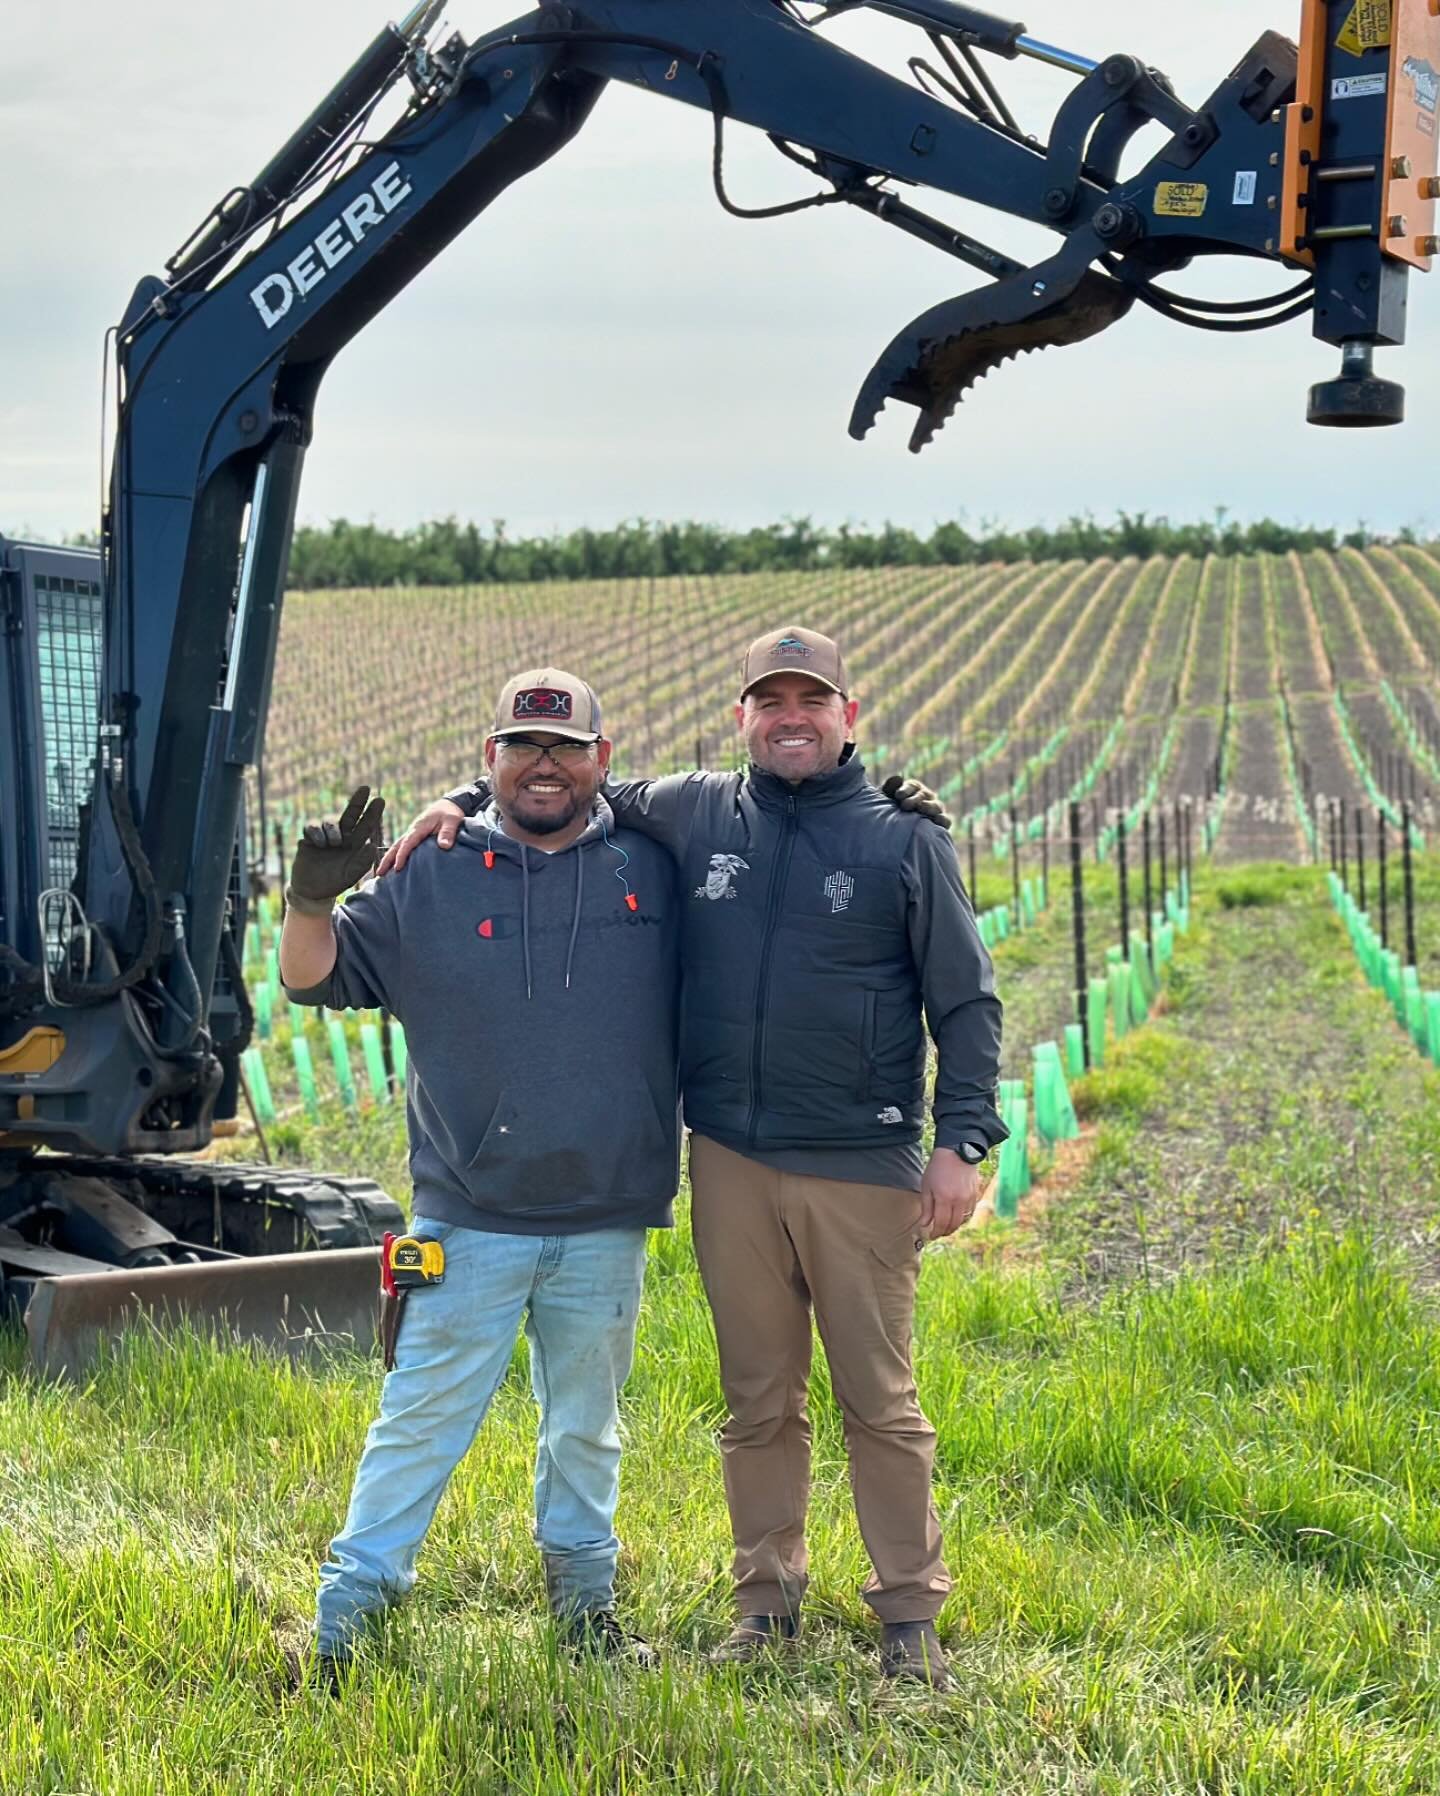 We finished pounding the end posts at our Chehelem Mountain Ava vineyard &ldquo;Sostrale&rdquo; meaning, sunray or sunbeam in Nordic 
17 acres planted last year, 22,000 vines, dry farmed, we pounded around 6,000 posts in the last weeks.
#vineyard #es